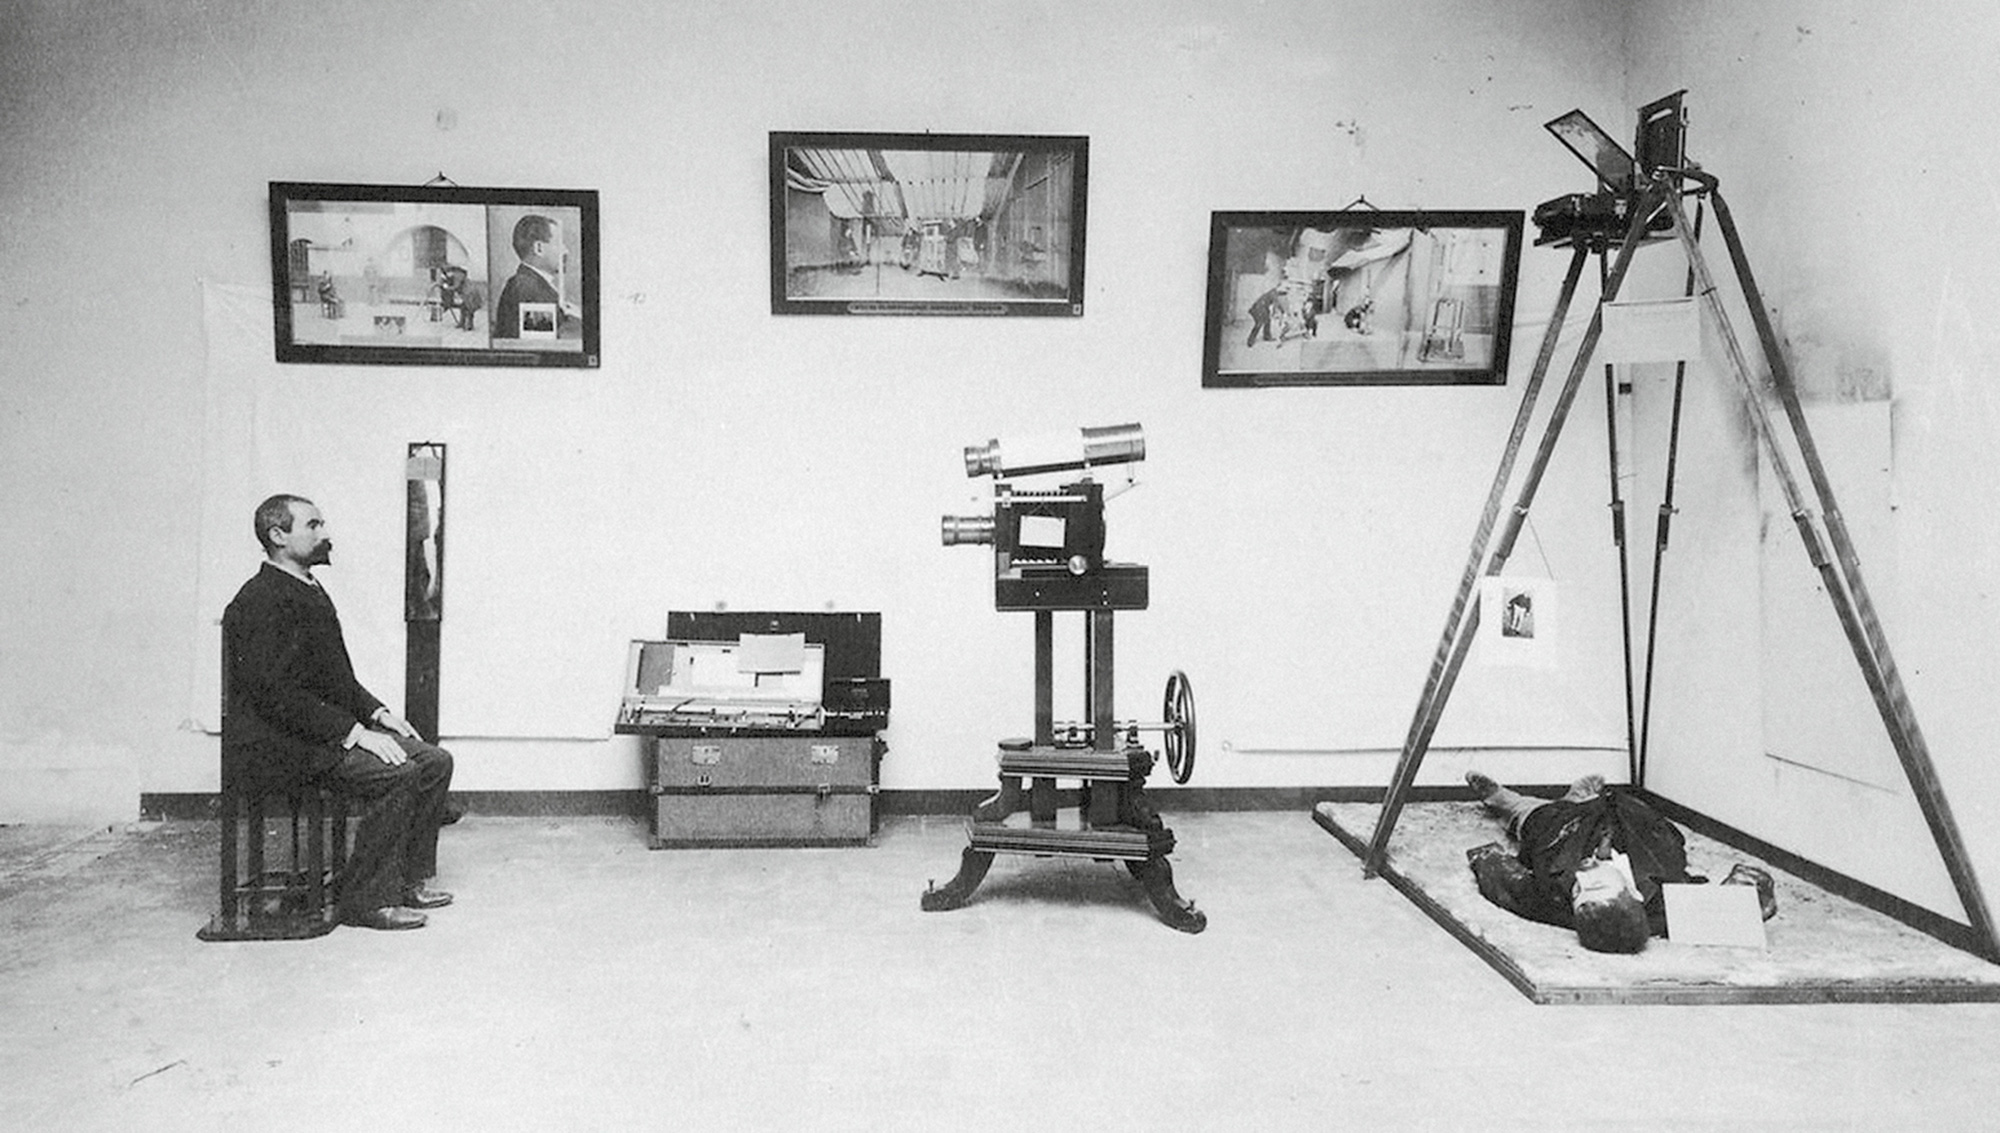 Image from Alphonse Bertillon’s photographic album of his exhibition at the 1893 World’s Columbian Exposition in Chicago. Courtesy National Library of Medicine.